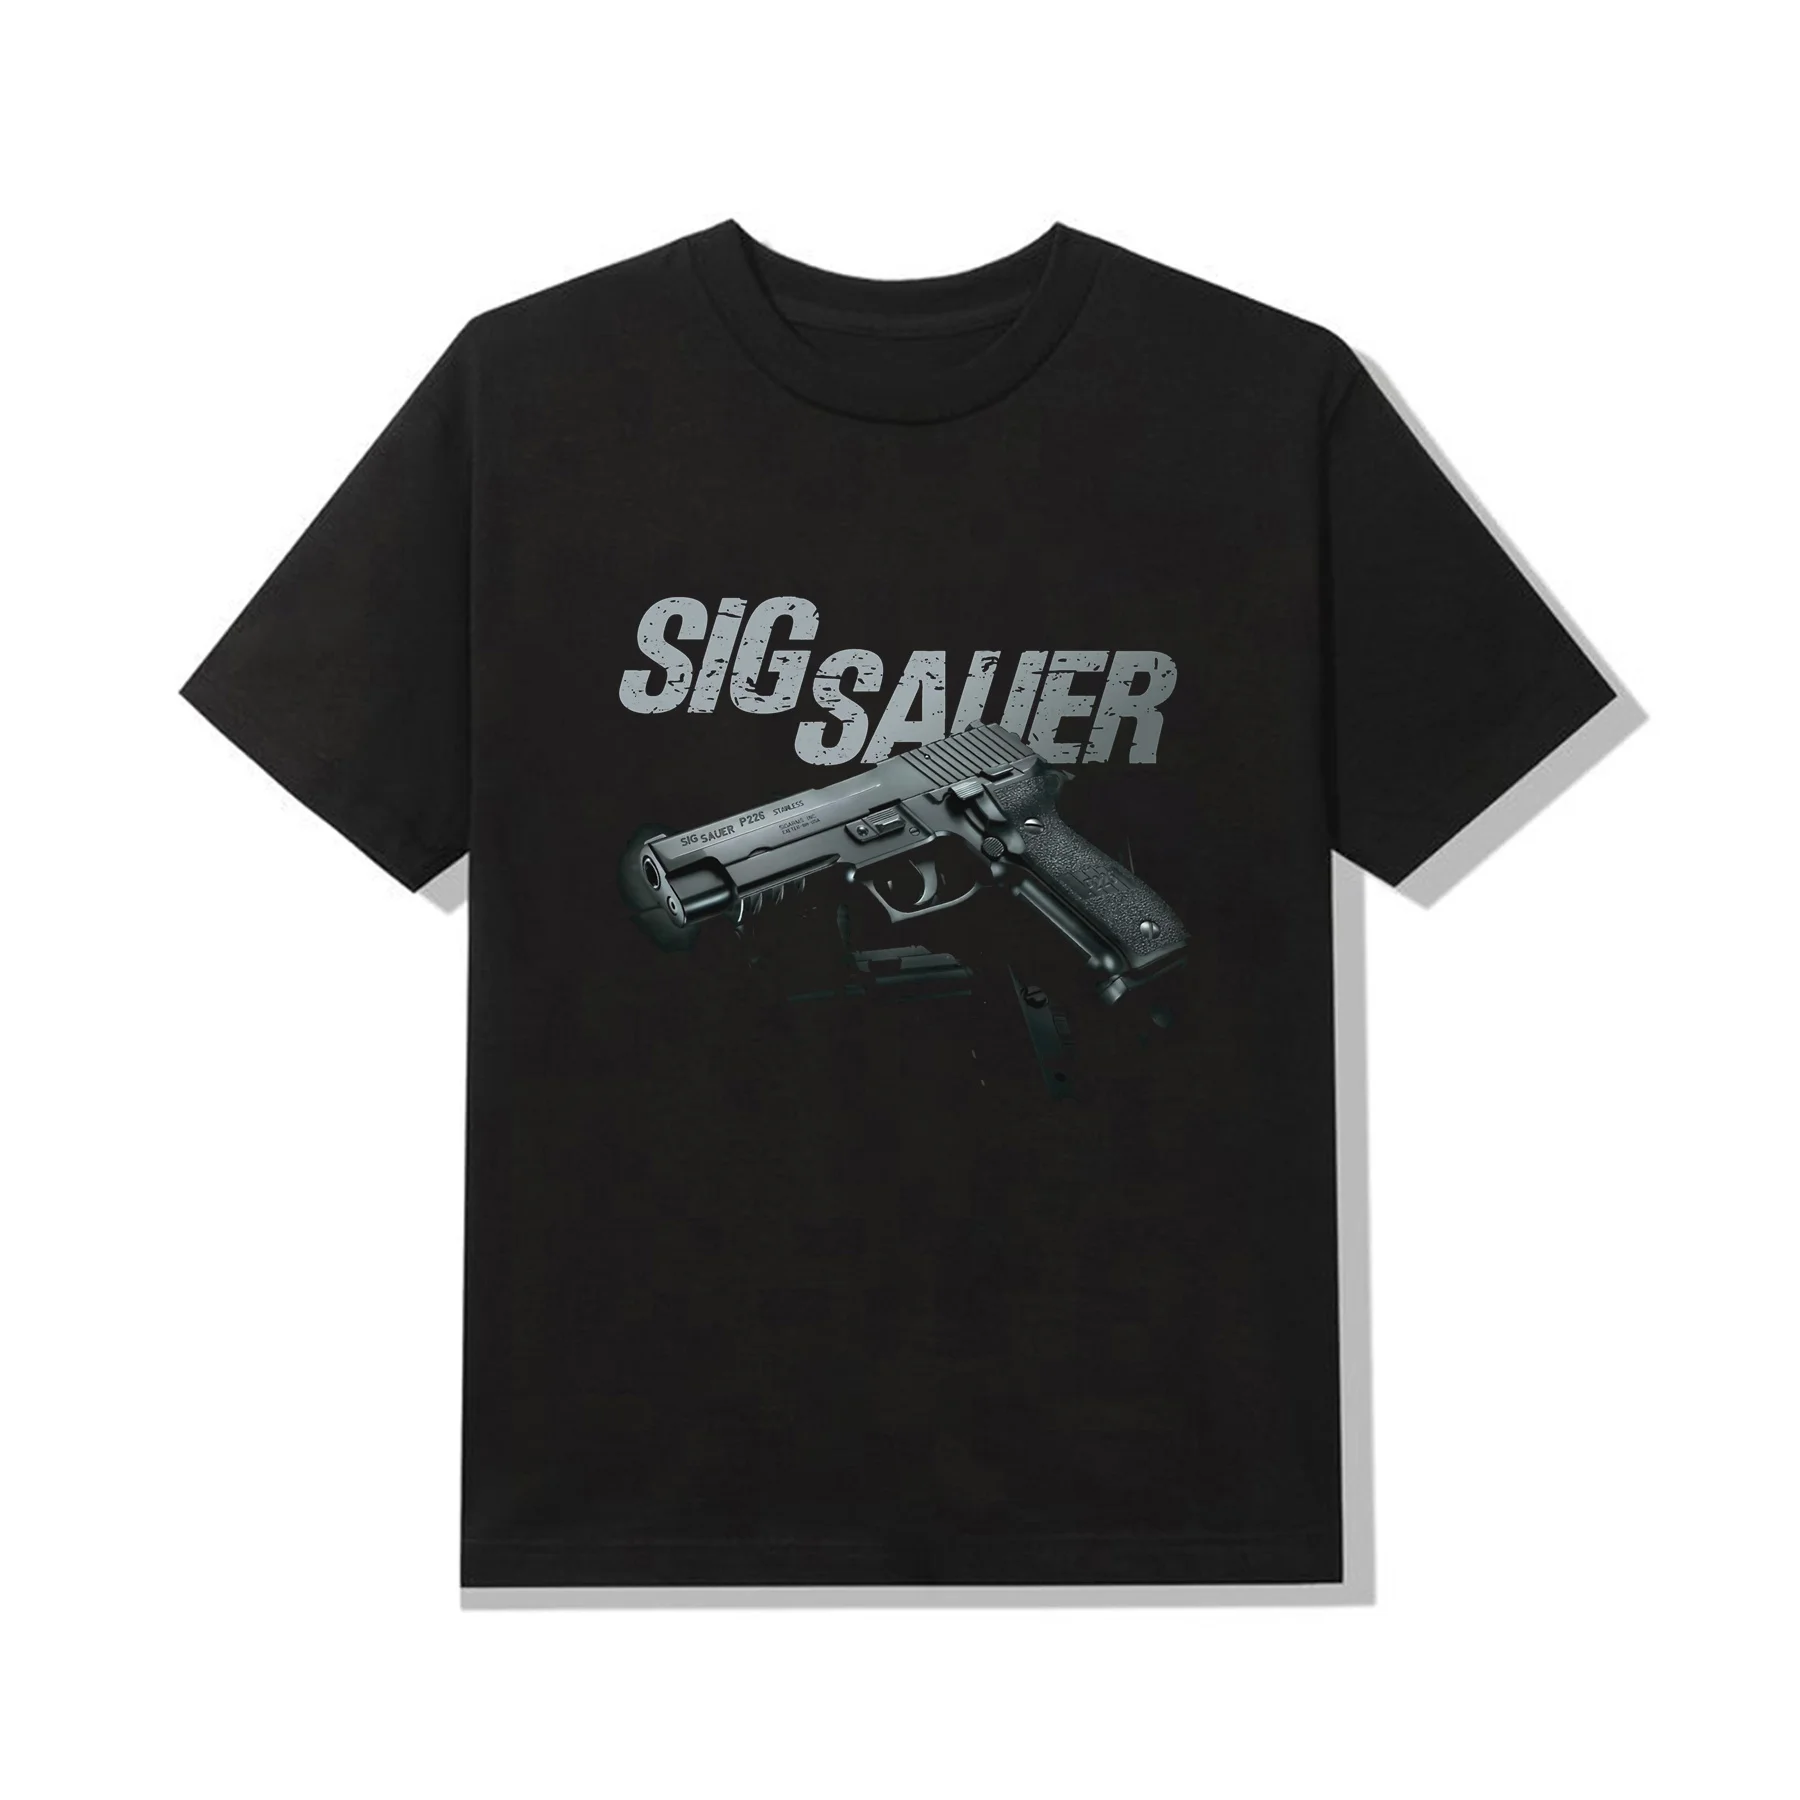 

Amazing Tee Male T Shirt Casual Oversized The Sig Sauer Fire Arms Outdoor Foundation Time Essential T-shirt Men Graphic T-shirts